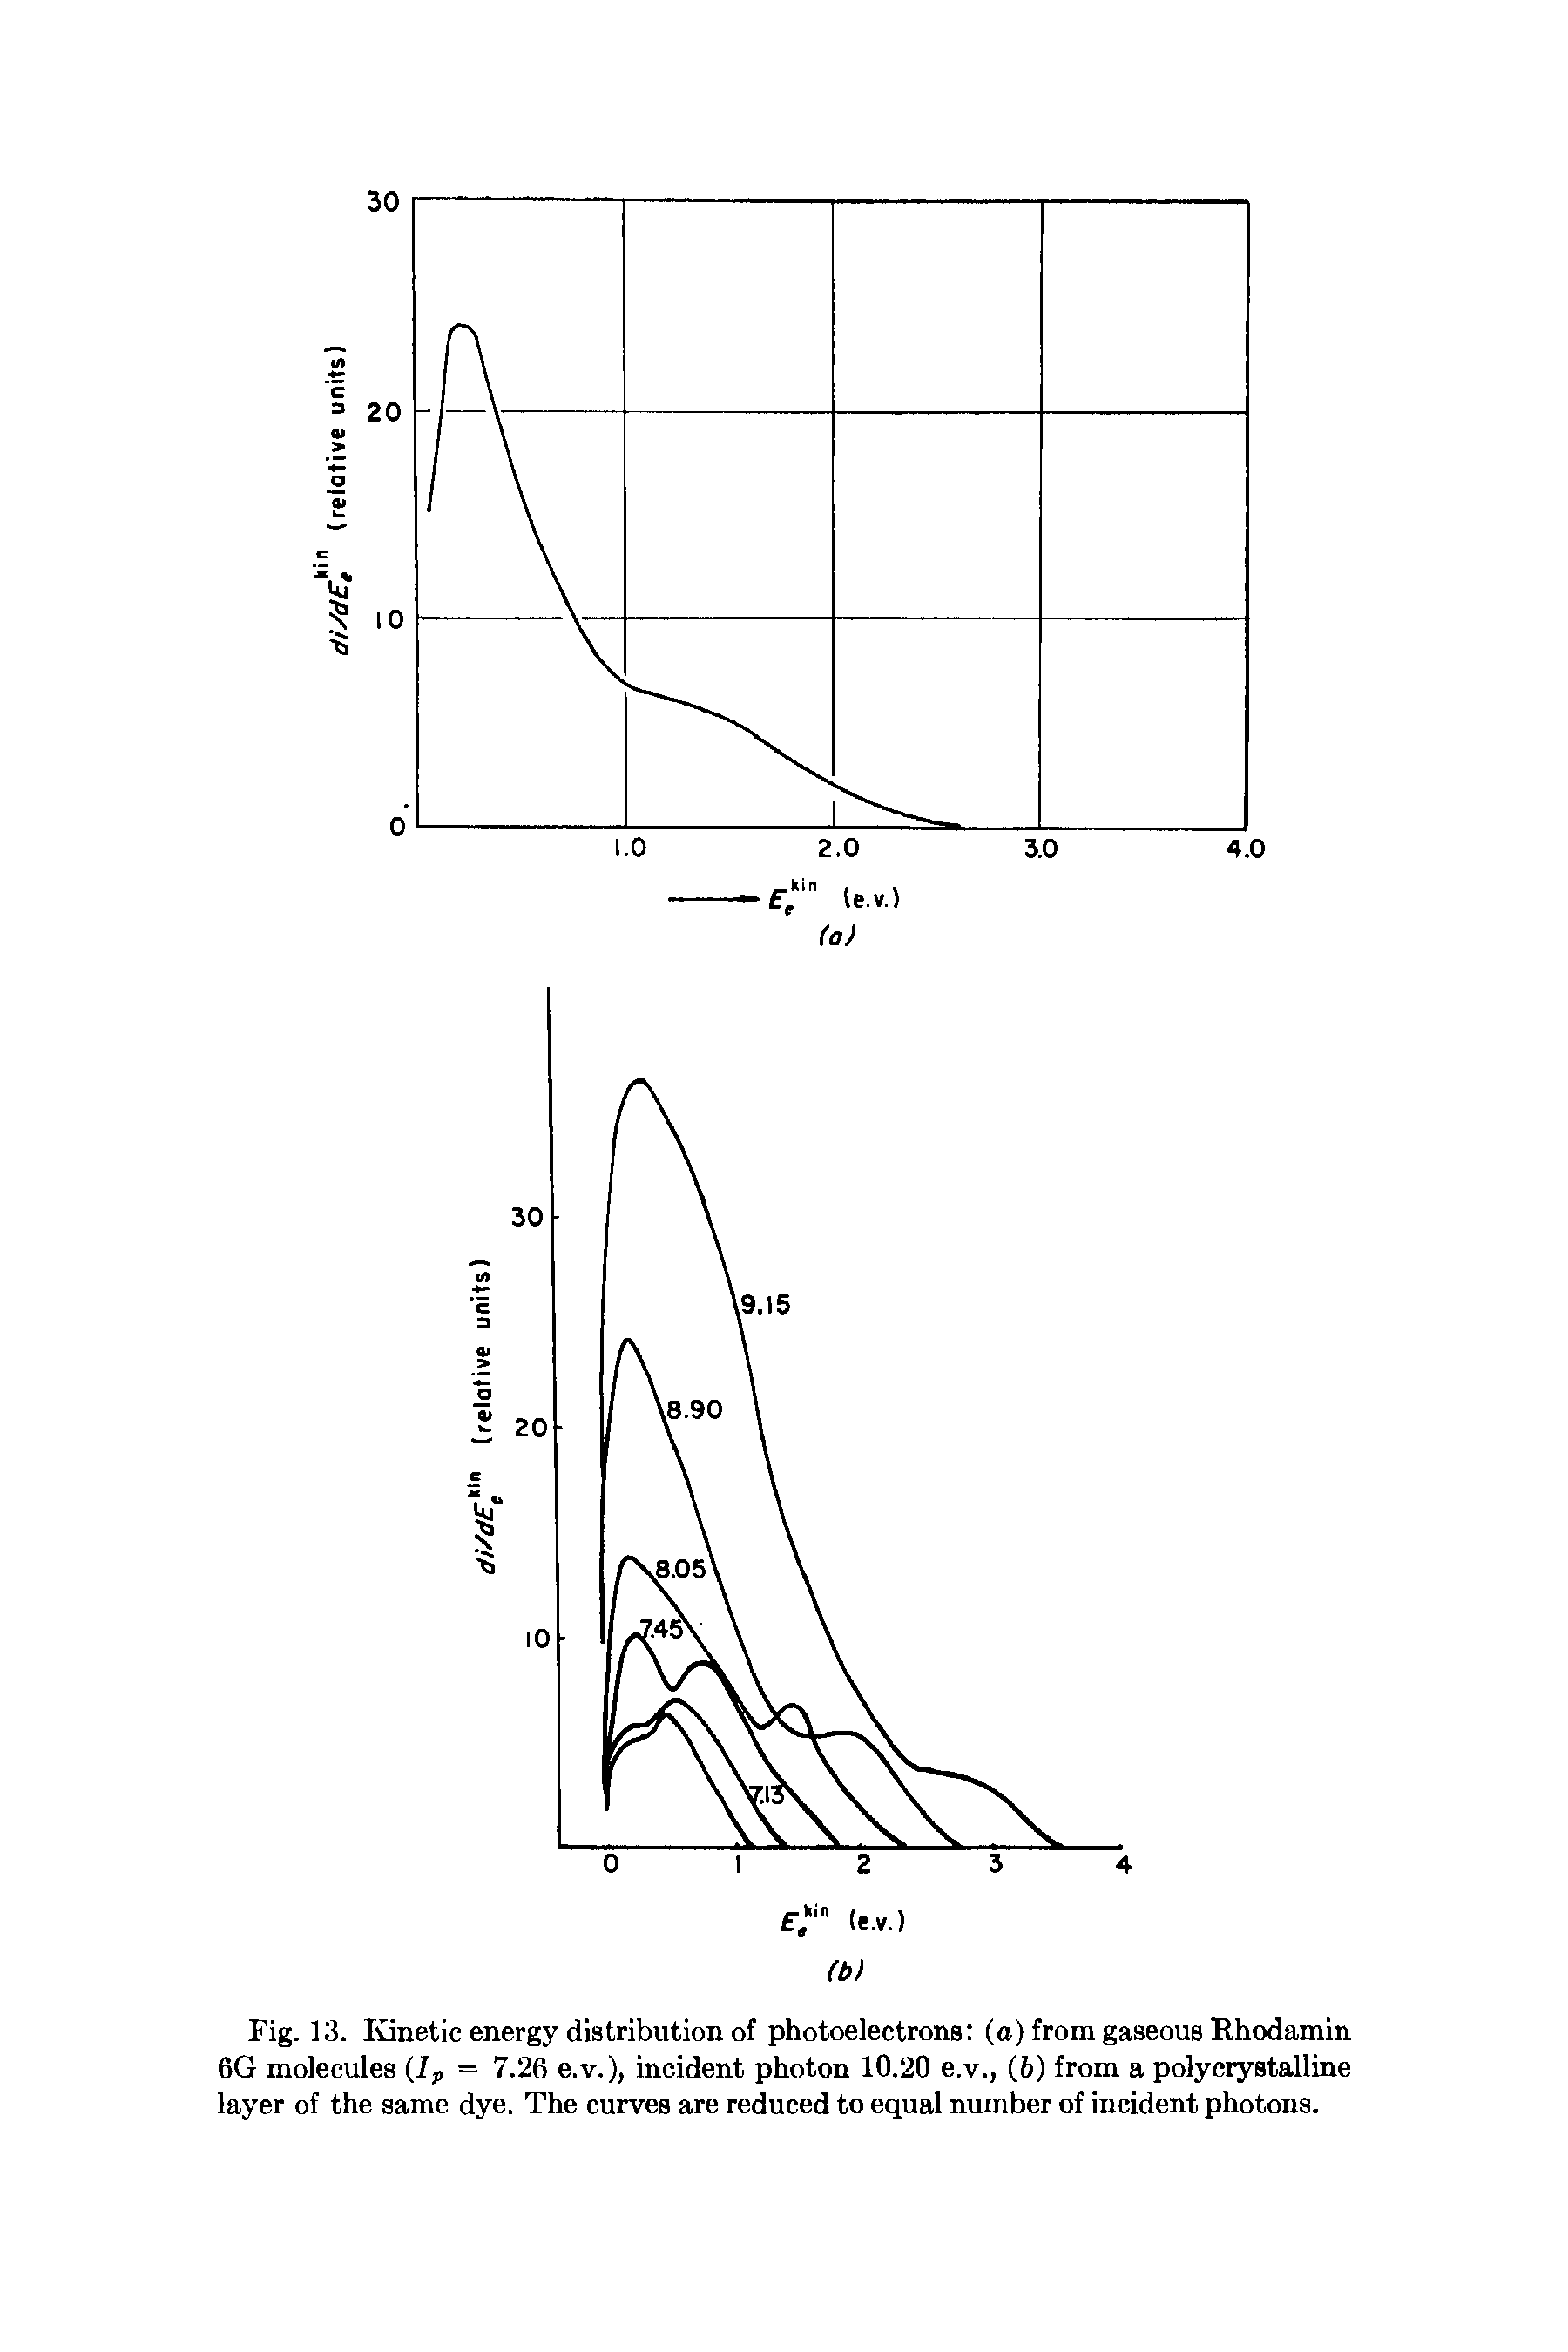 Fig. 13. Kinetic energy distribution of photoelectrons (o) from gaseous Rhodamin 6G molecules (Ip = 7.26 e.v.), incident photon 10.20 e.v., (6) from a polyerystalline layer of the same dye. The curves are reduced to equal number of incident photons.